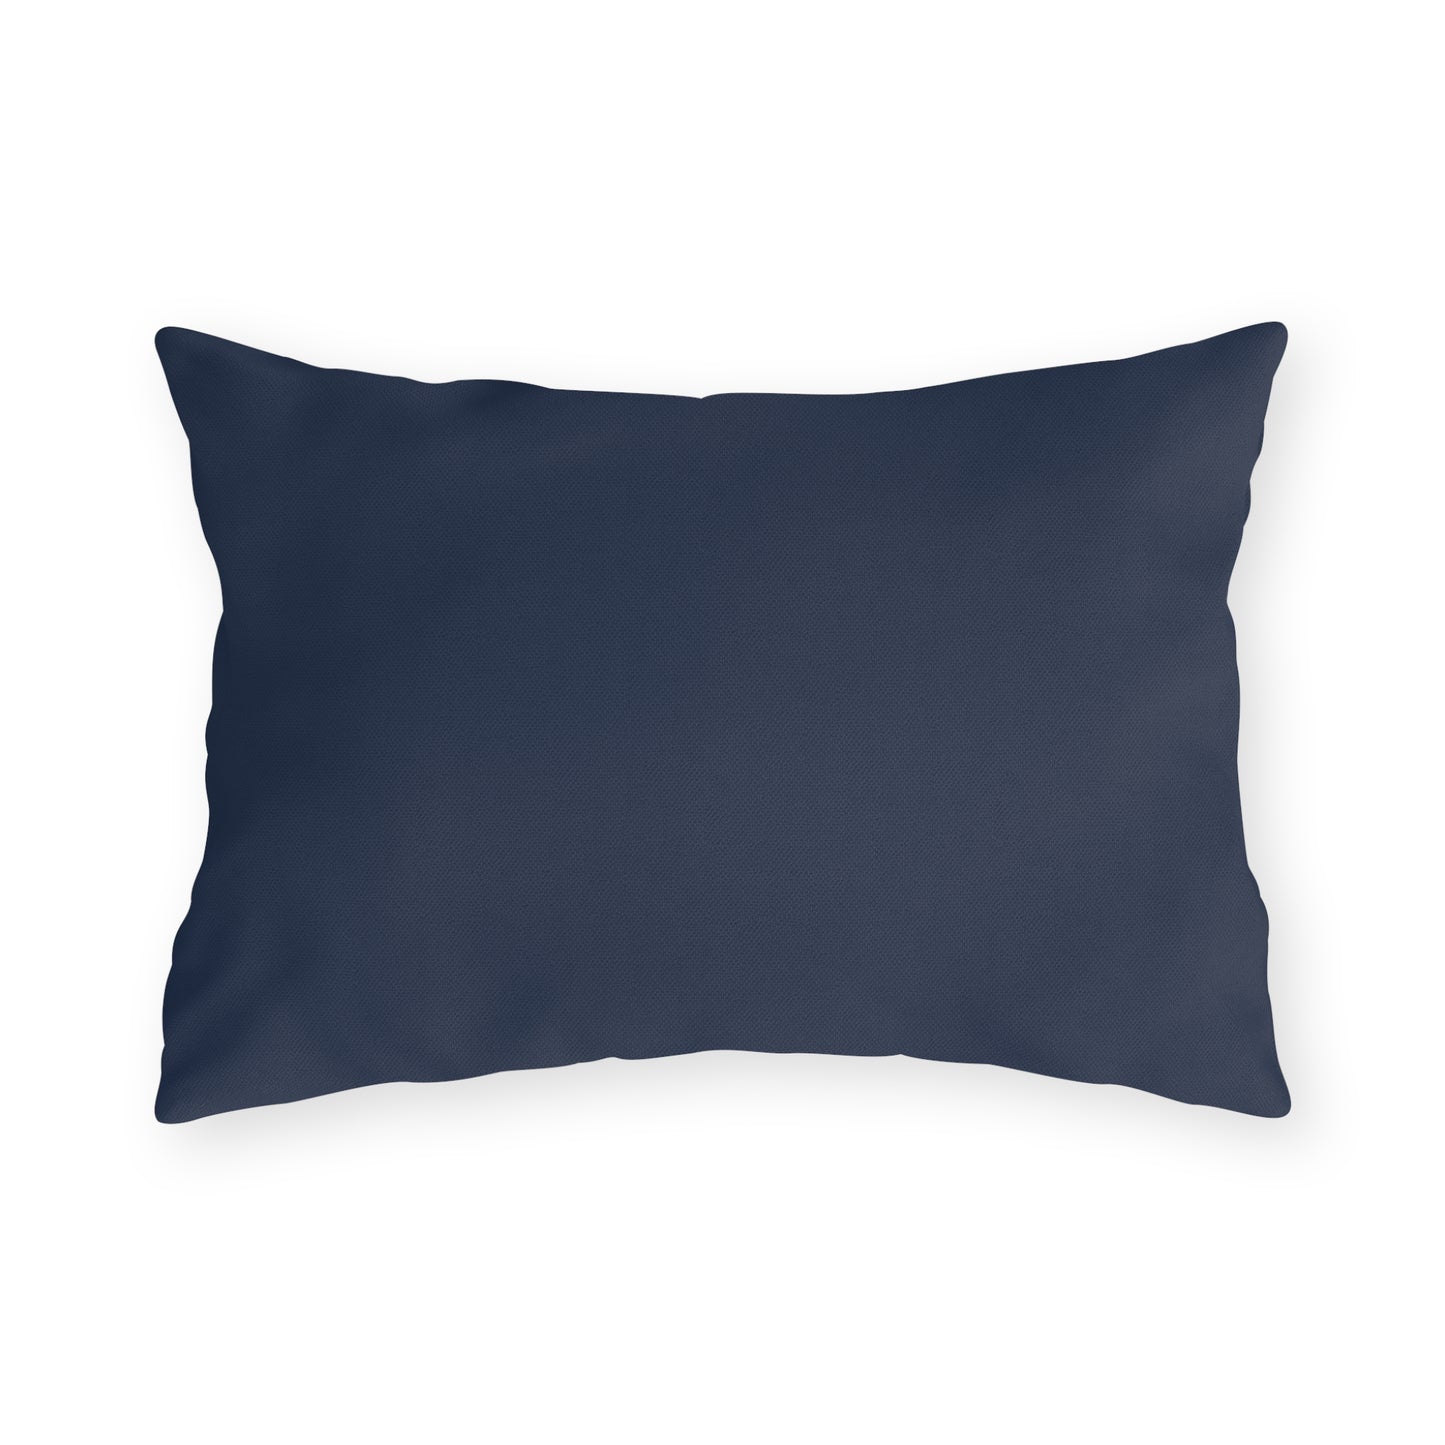 Navy Blue Outdoor Indoor Pillow with Insert, Patio Front  Porch Decor, Beach Bedroom Sofa Chair Washable Layering Throw Pillow